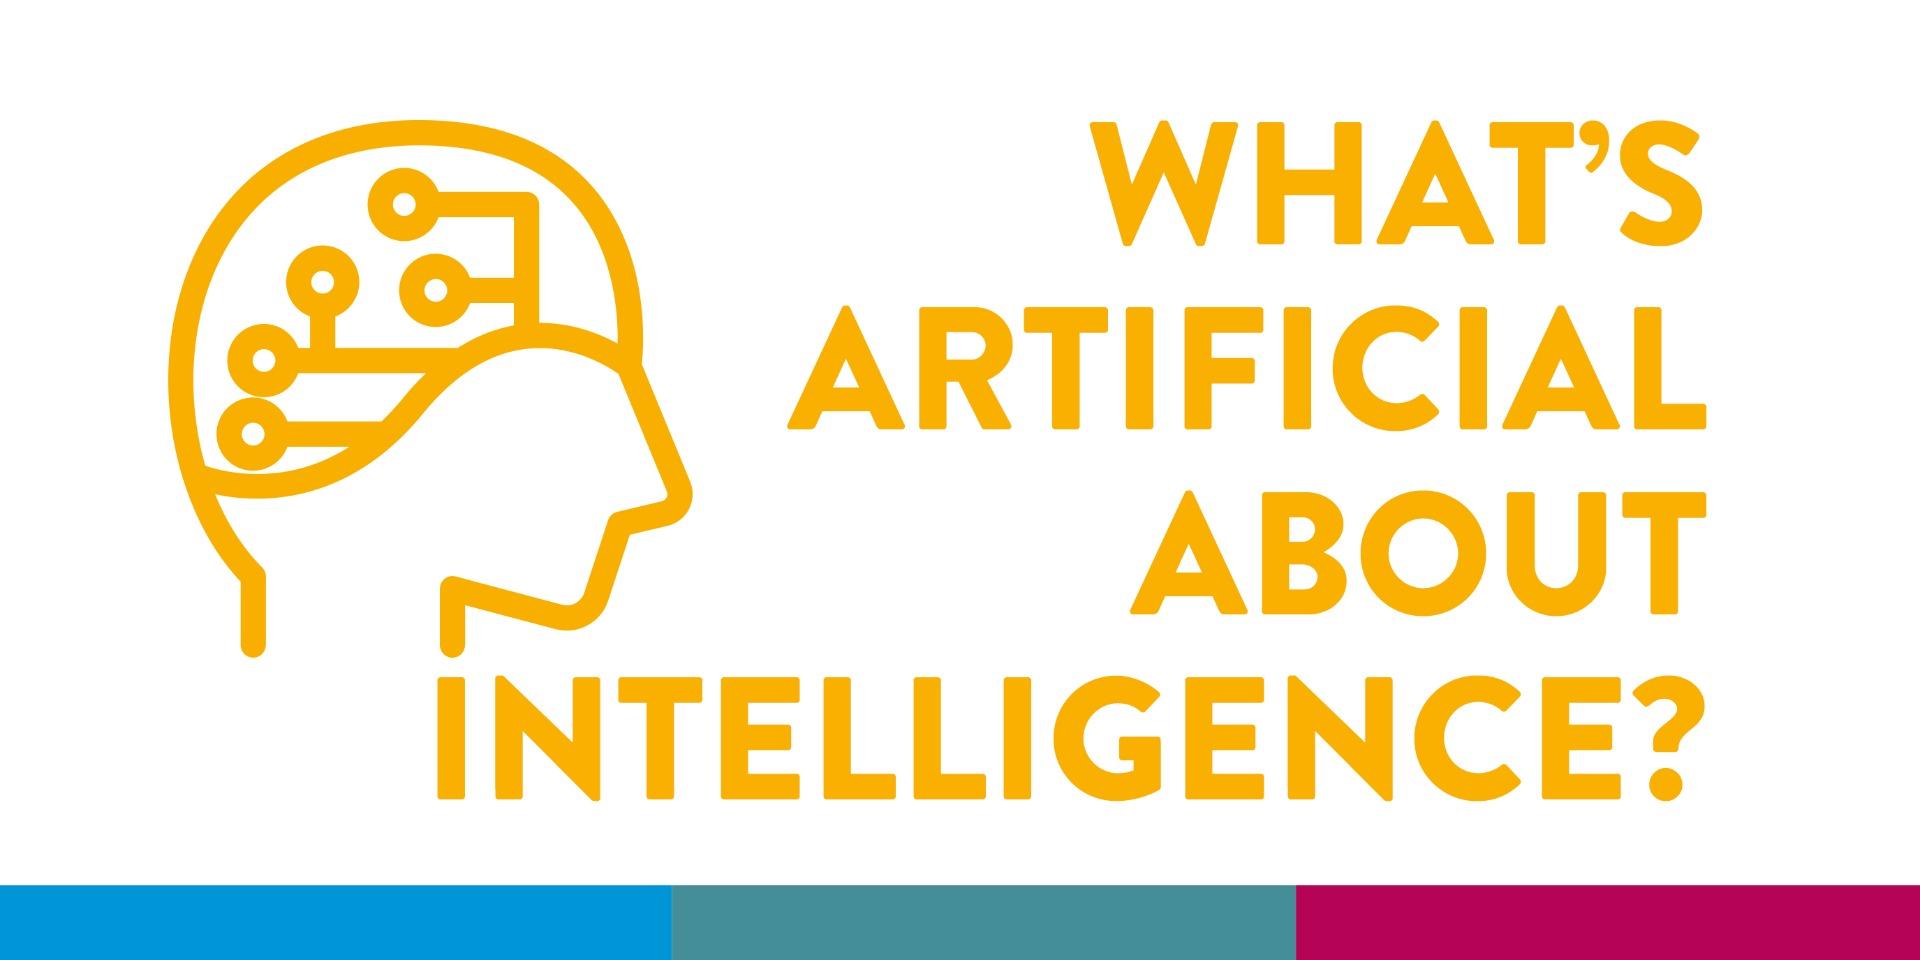 What’s Artificial about Intelligence?